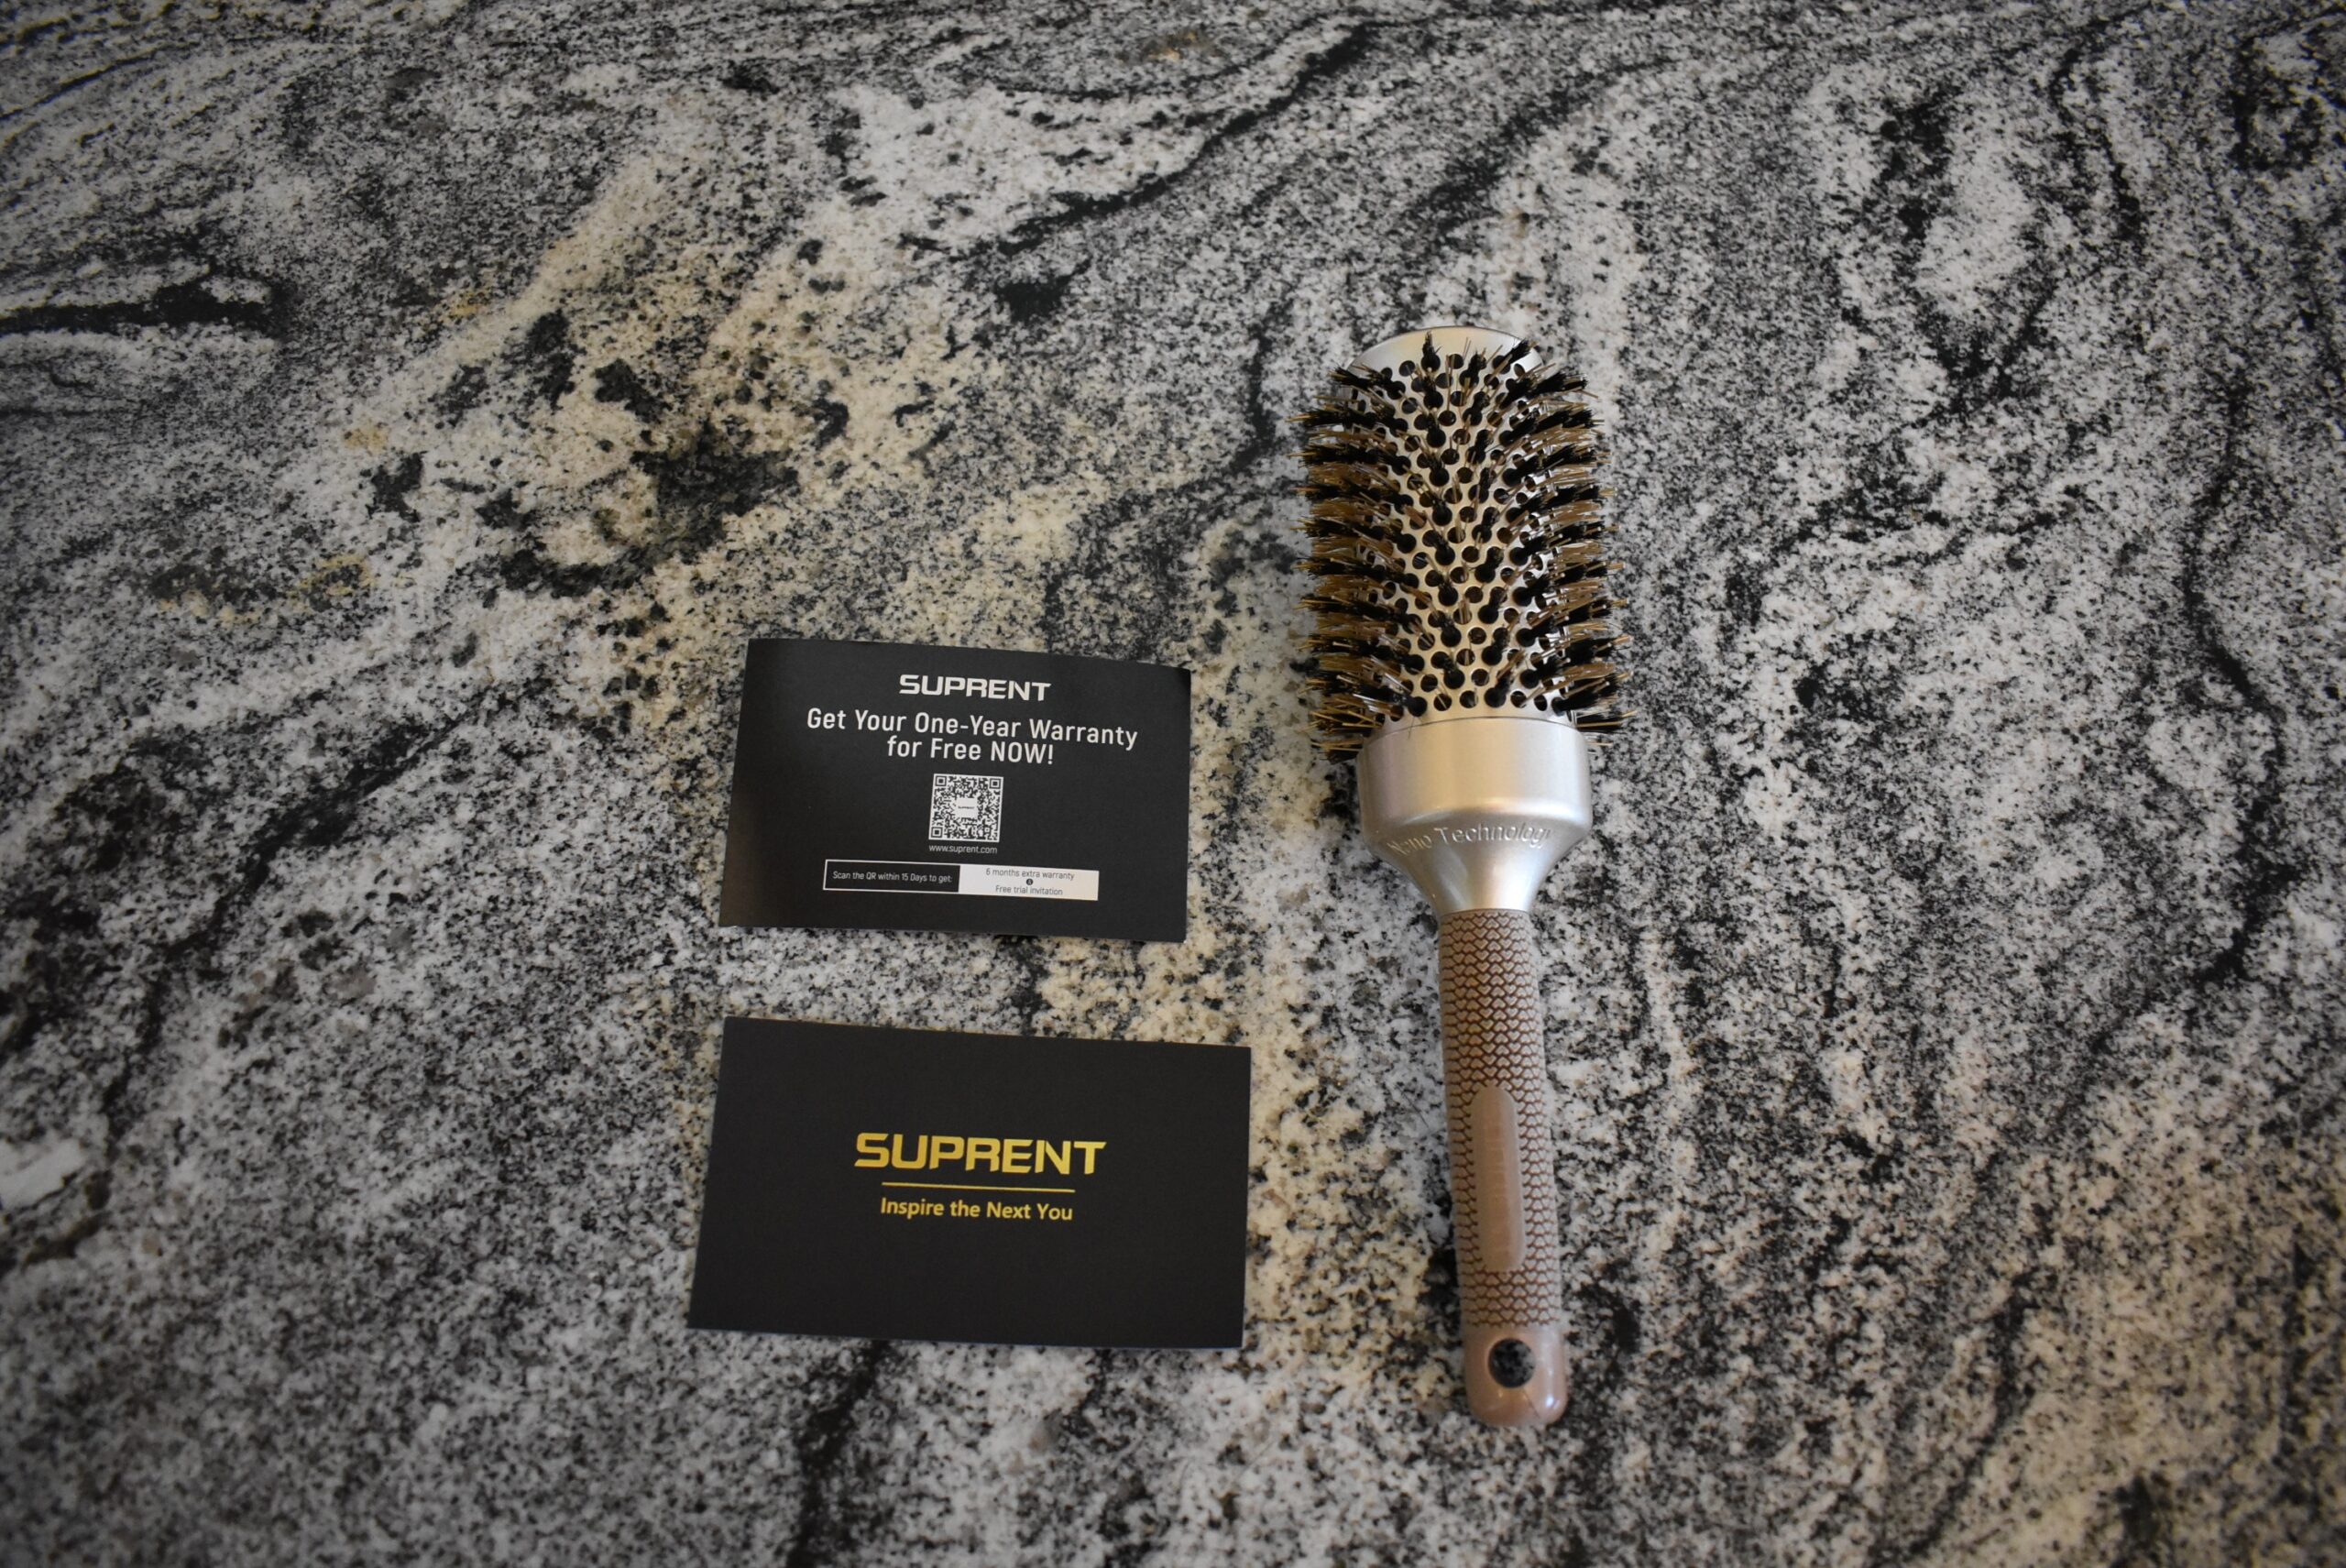 SUPRENT Nano Thermic Ceramic Round Brush with the accessories that come in the box